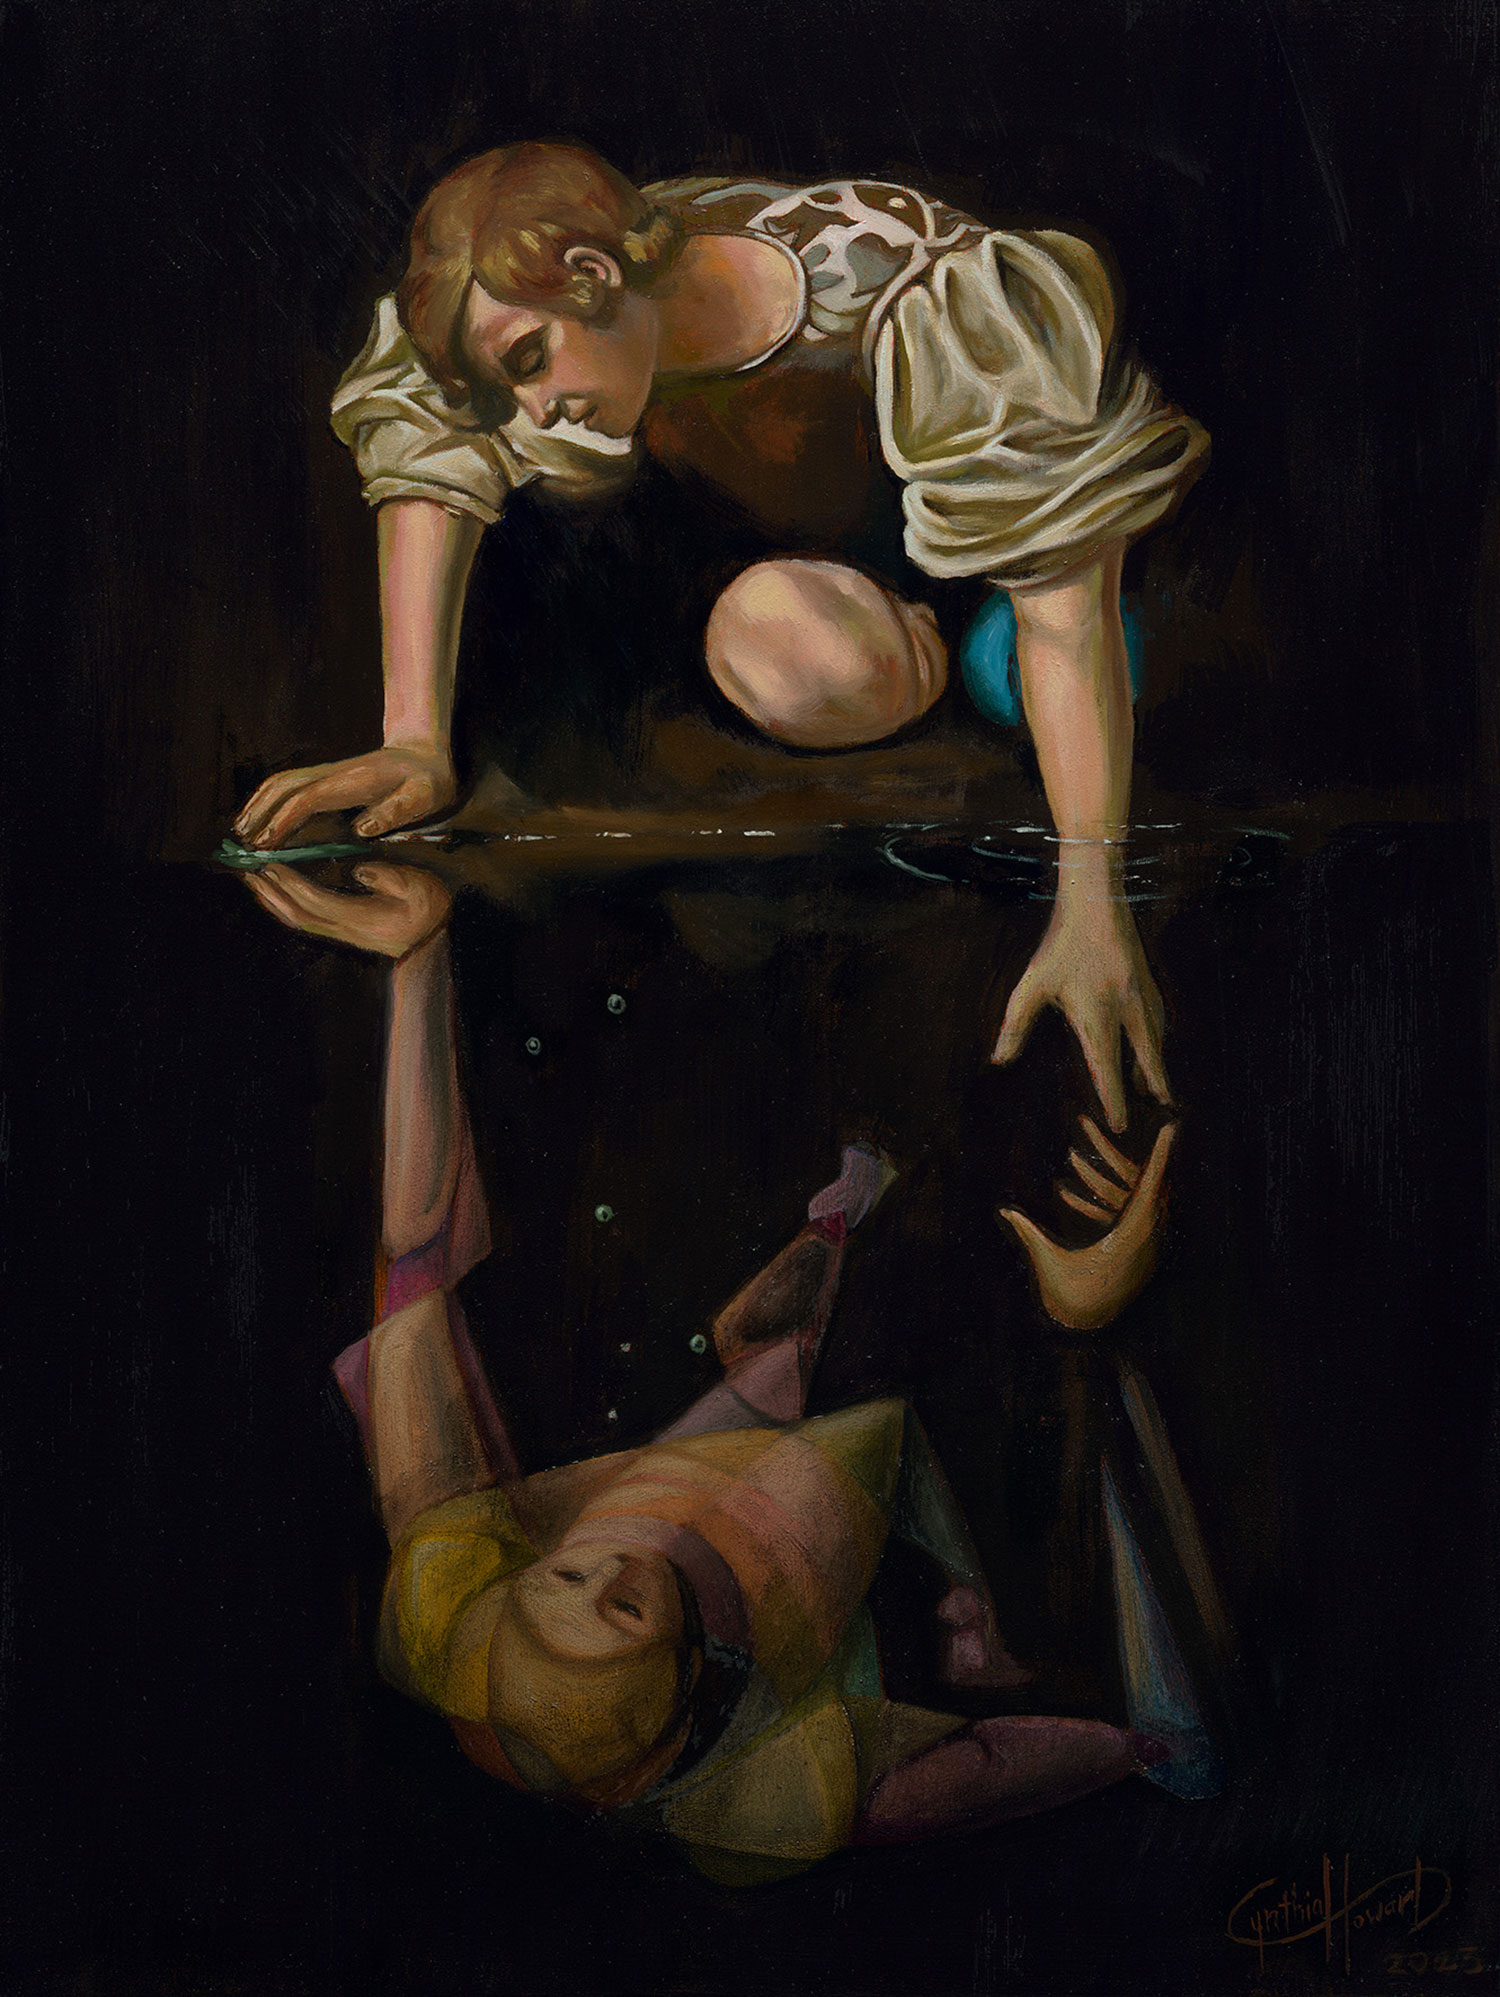 The narcissist who saved himself, oil on gessobord by Cynthia Howard